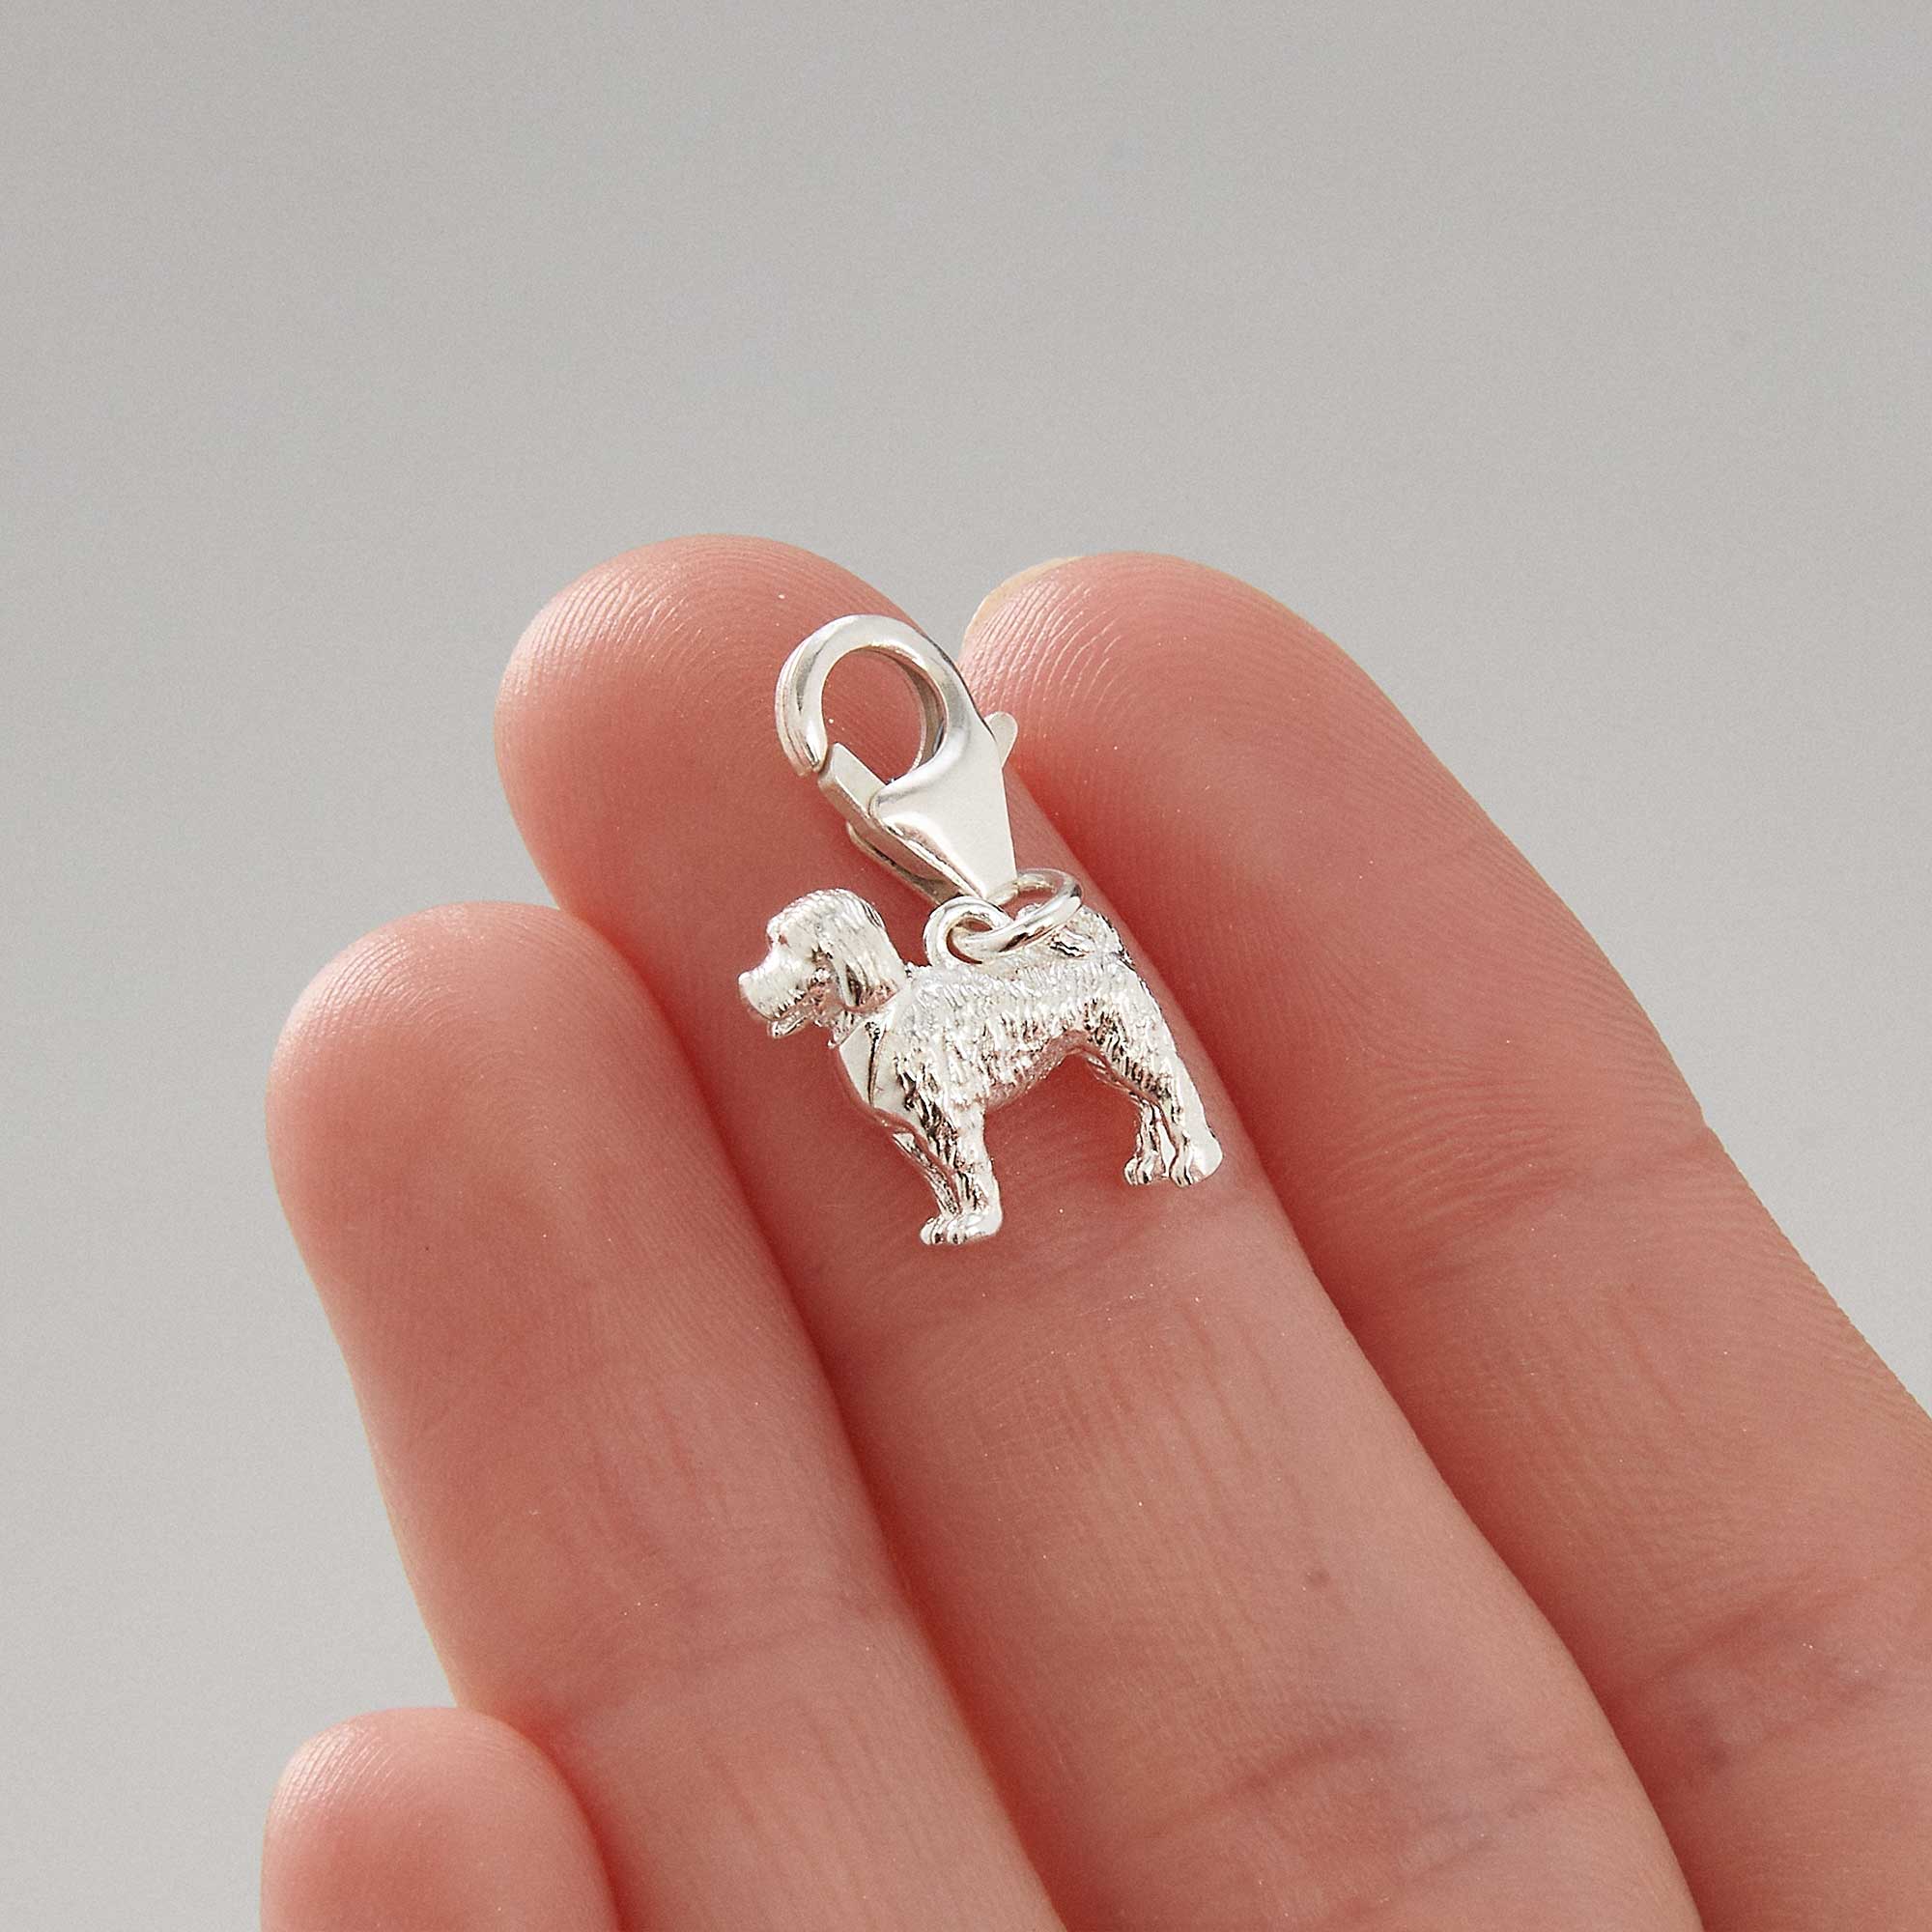 Cockapoo Cockerpoo silver dog breed solid sterling silver dog charm with clip lobster clasp Scarlett Jewellery Ltd